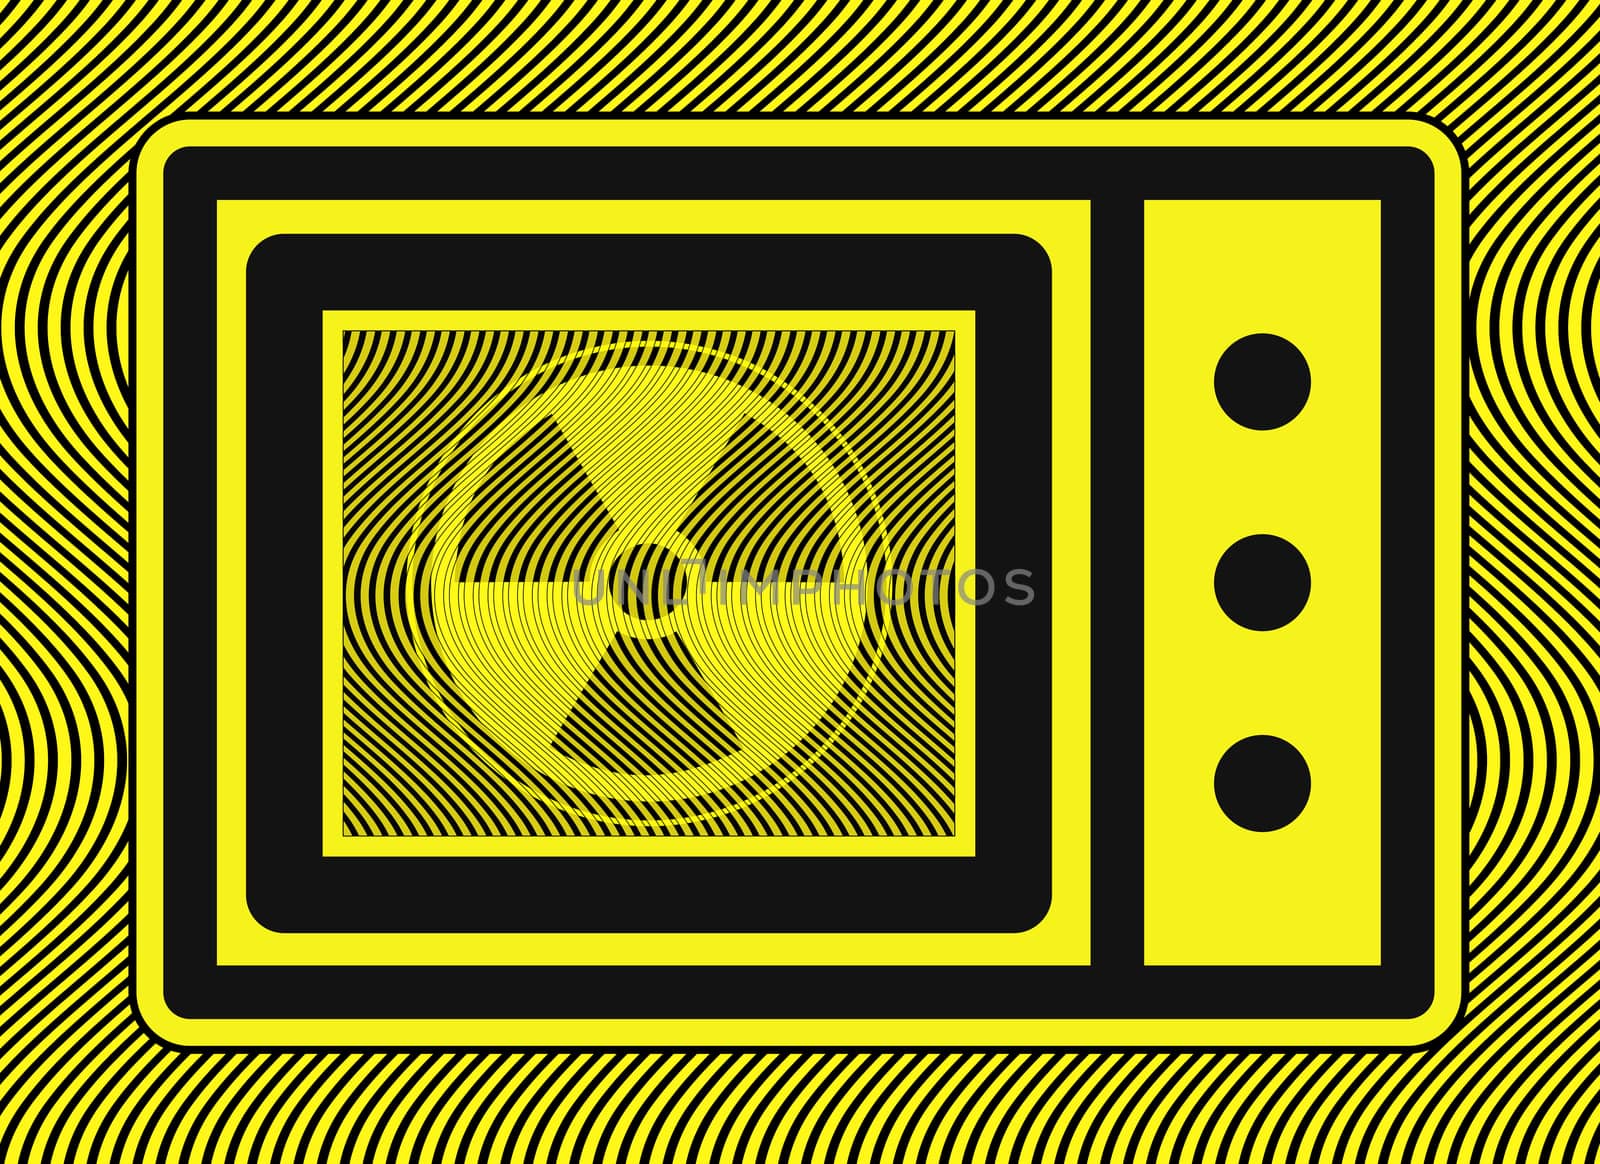 Microwave Oven Radiation by Bambara